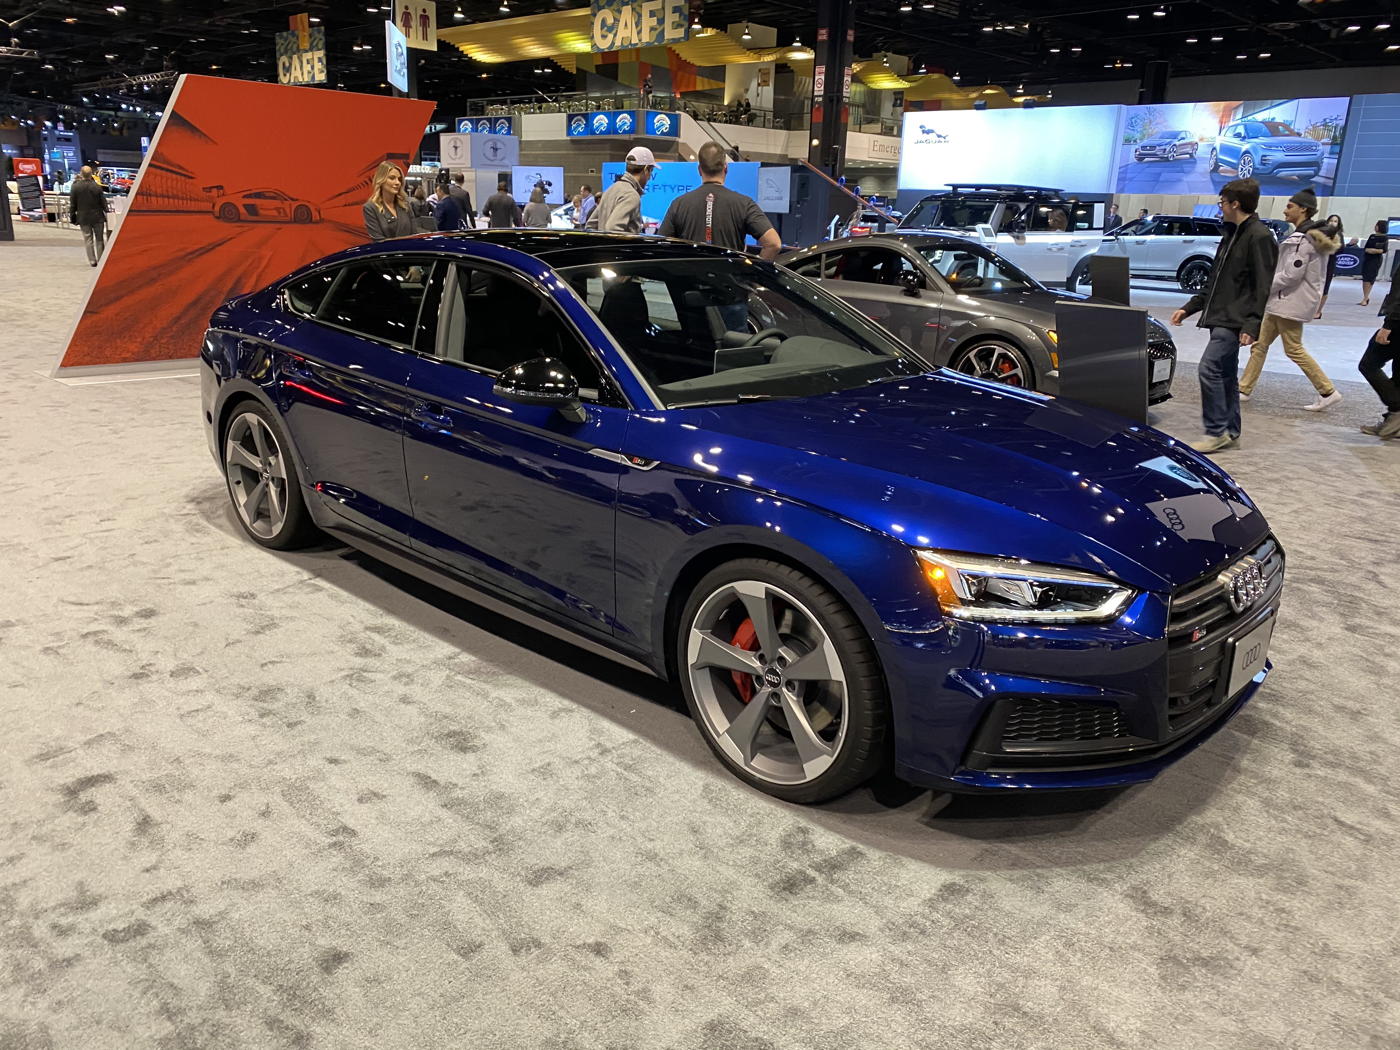 http://thecarchat.net/admin/carchat_admin/app/web/img/uploaded/2020 Audi S5 Sportback at 2020 Chicago Auto Show.JPG